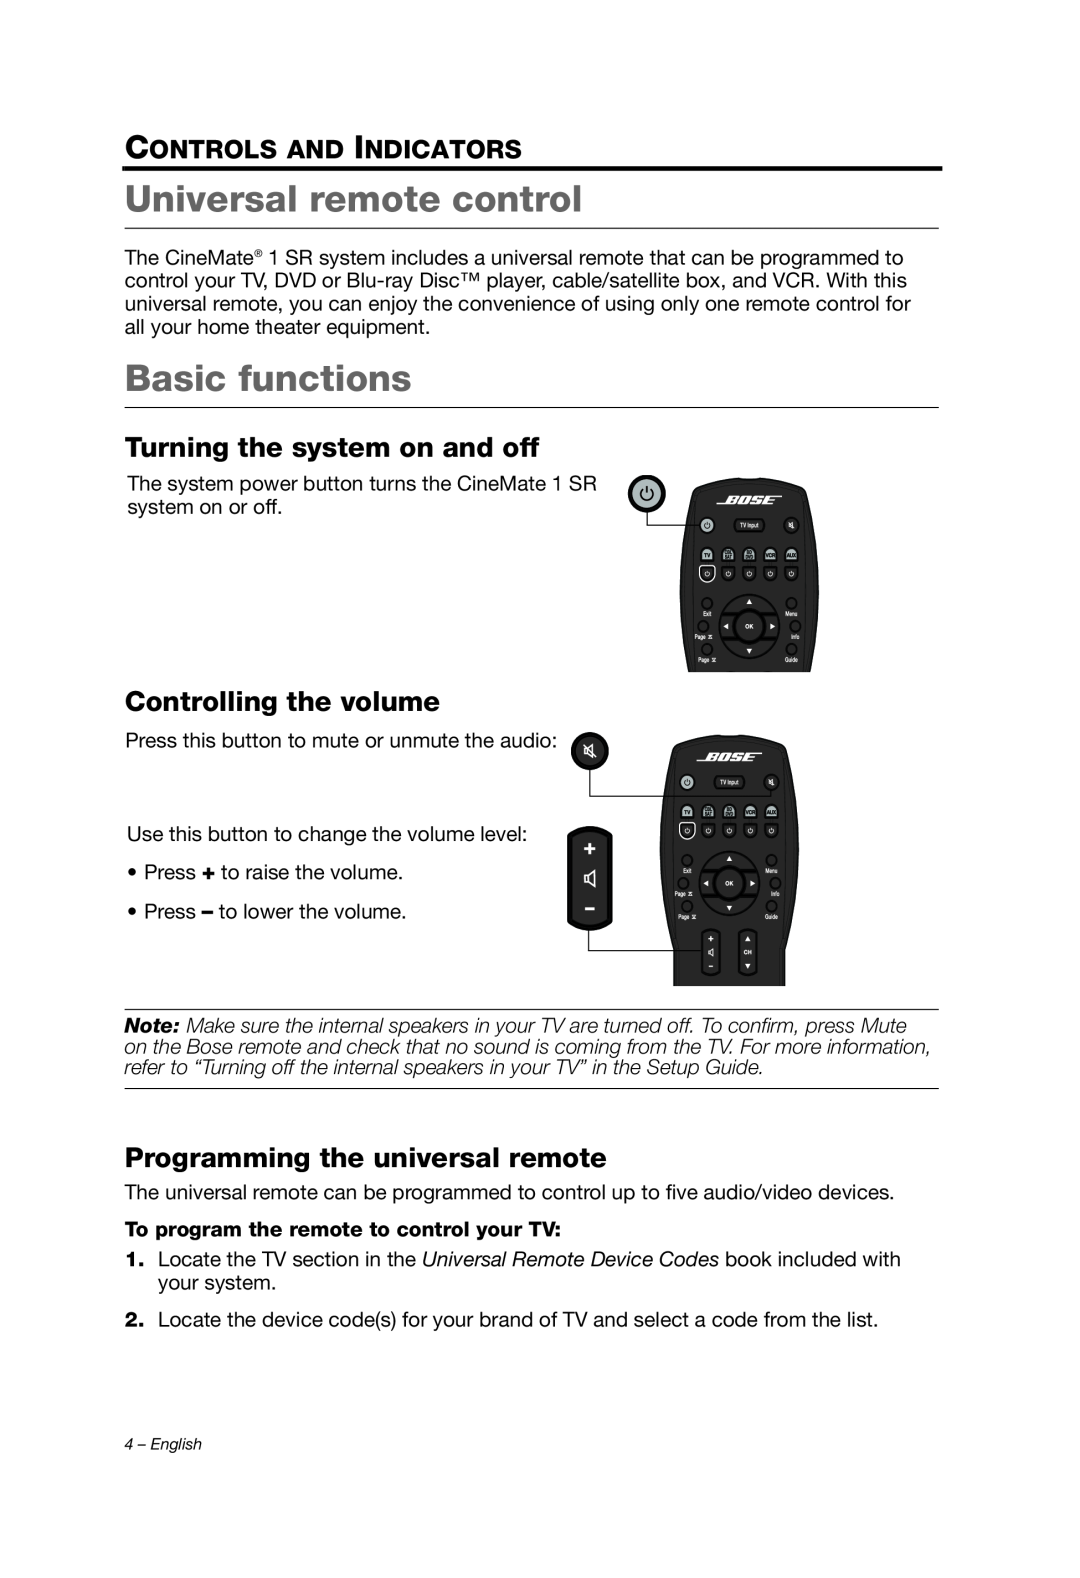 Bose 1 SR manual Universal remote control, Basic functions, Turning the system on and off, Controlling the volume 